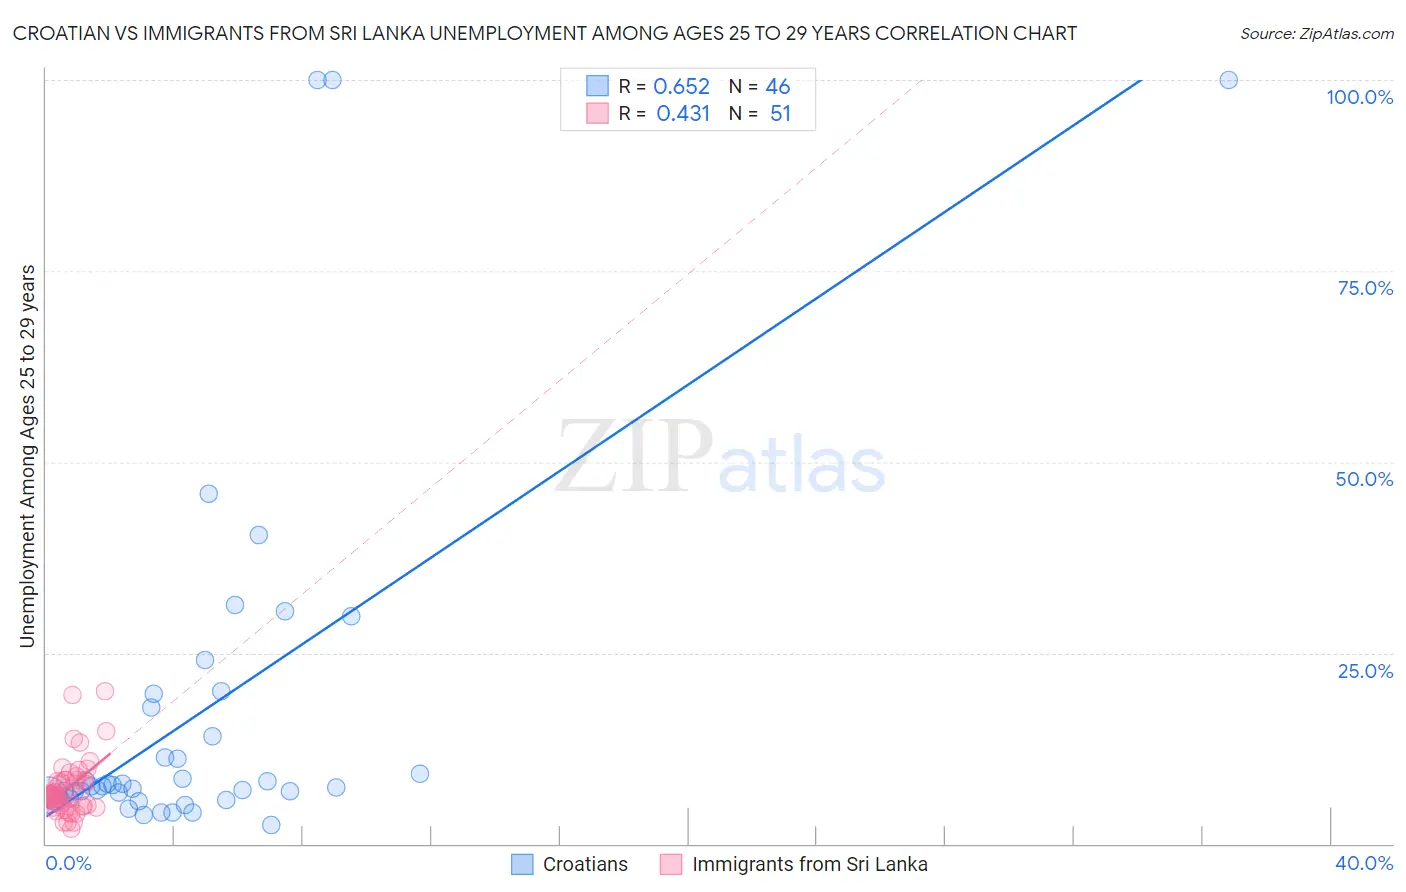 Croatian vs Immigrants from Sri Lanka Unemployment Among Ages 25 to 29 years